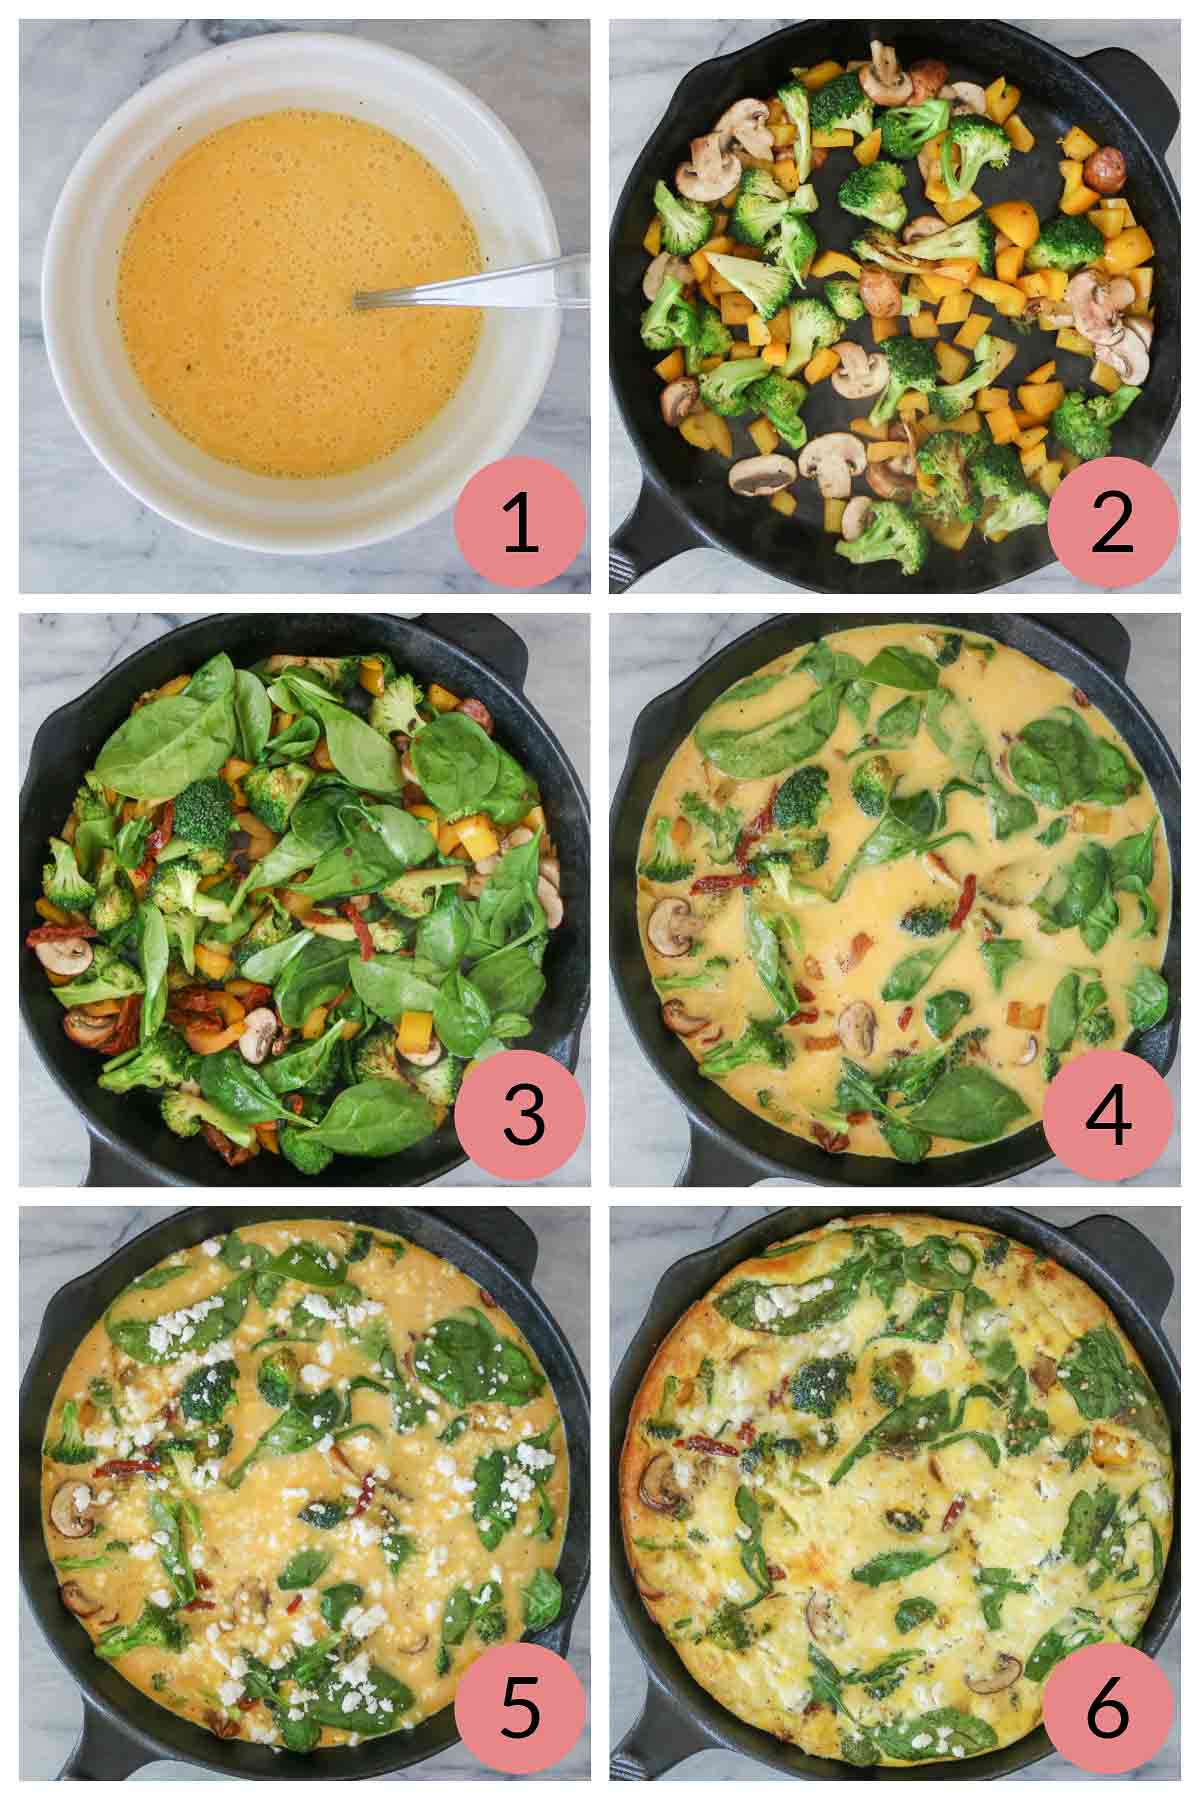 Collage of steps to make a frittata with vegetables.